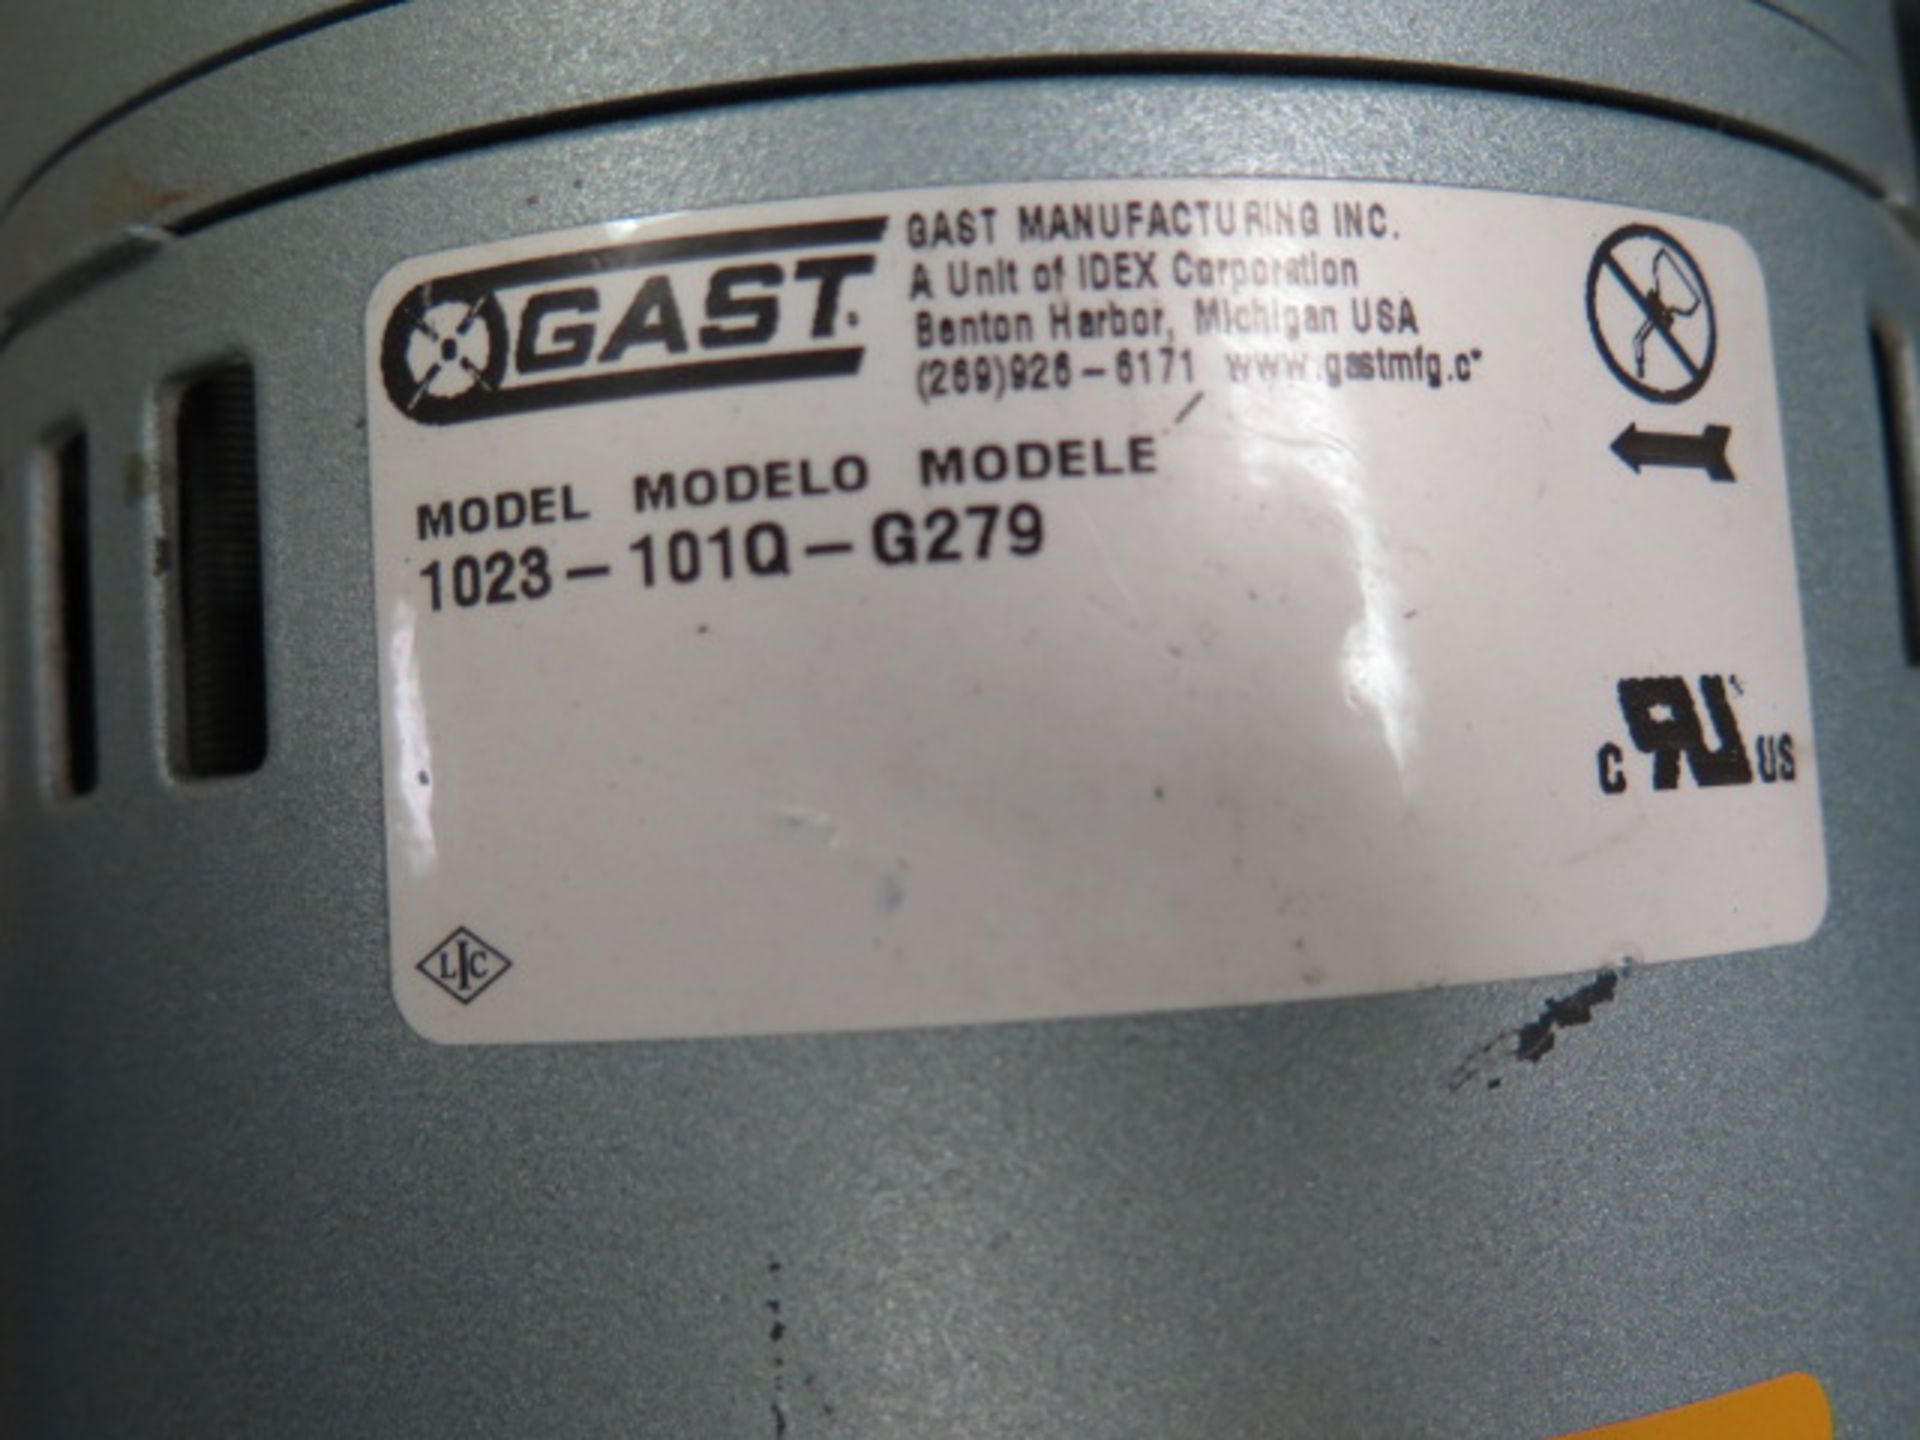 Gast mdl. 1023-101Q-G279 Vacuum Pumps (3) 3/4Hp 208-230/380-460V (SOLD AS-IS - NO WARRANTY) - Image 5 of 5